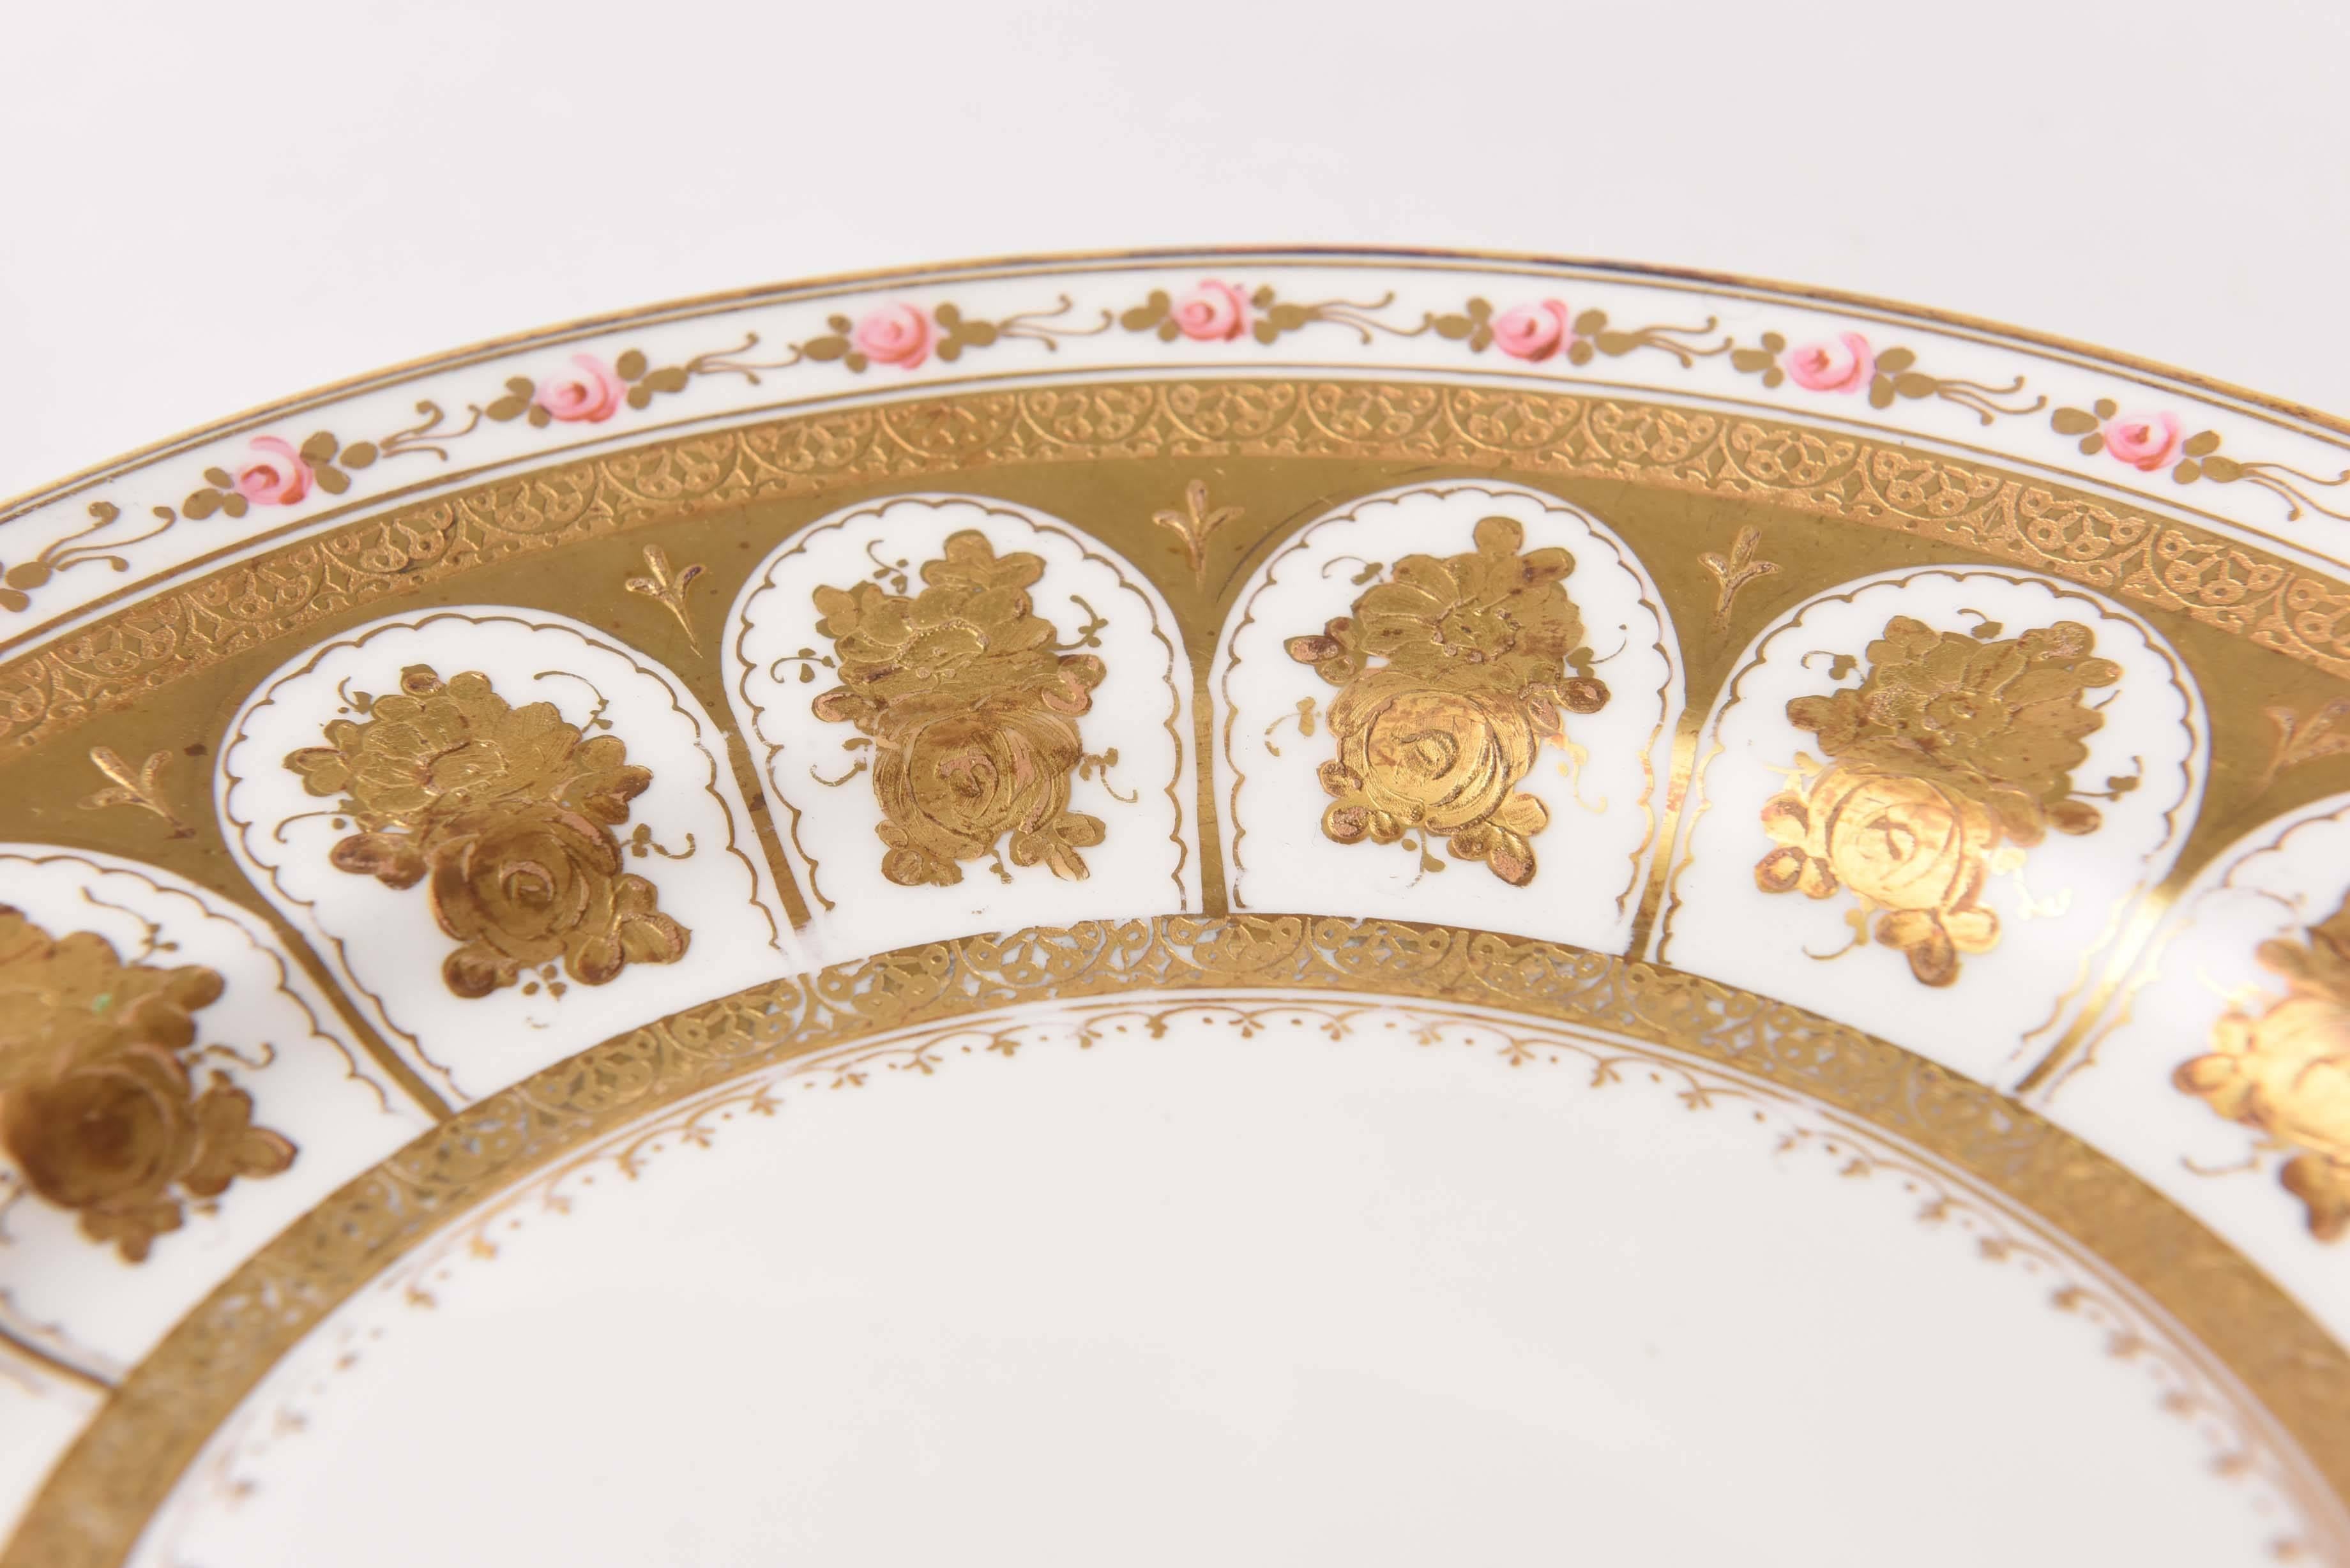 Hand-Crafted 12 Stunning Antique Dessert or Salad Plates, Heavily Gilded English Hand-Painted